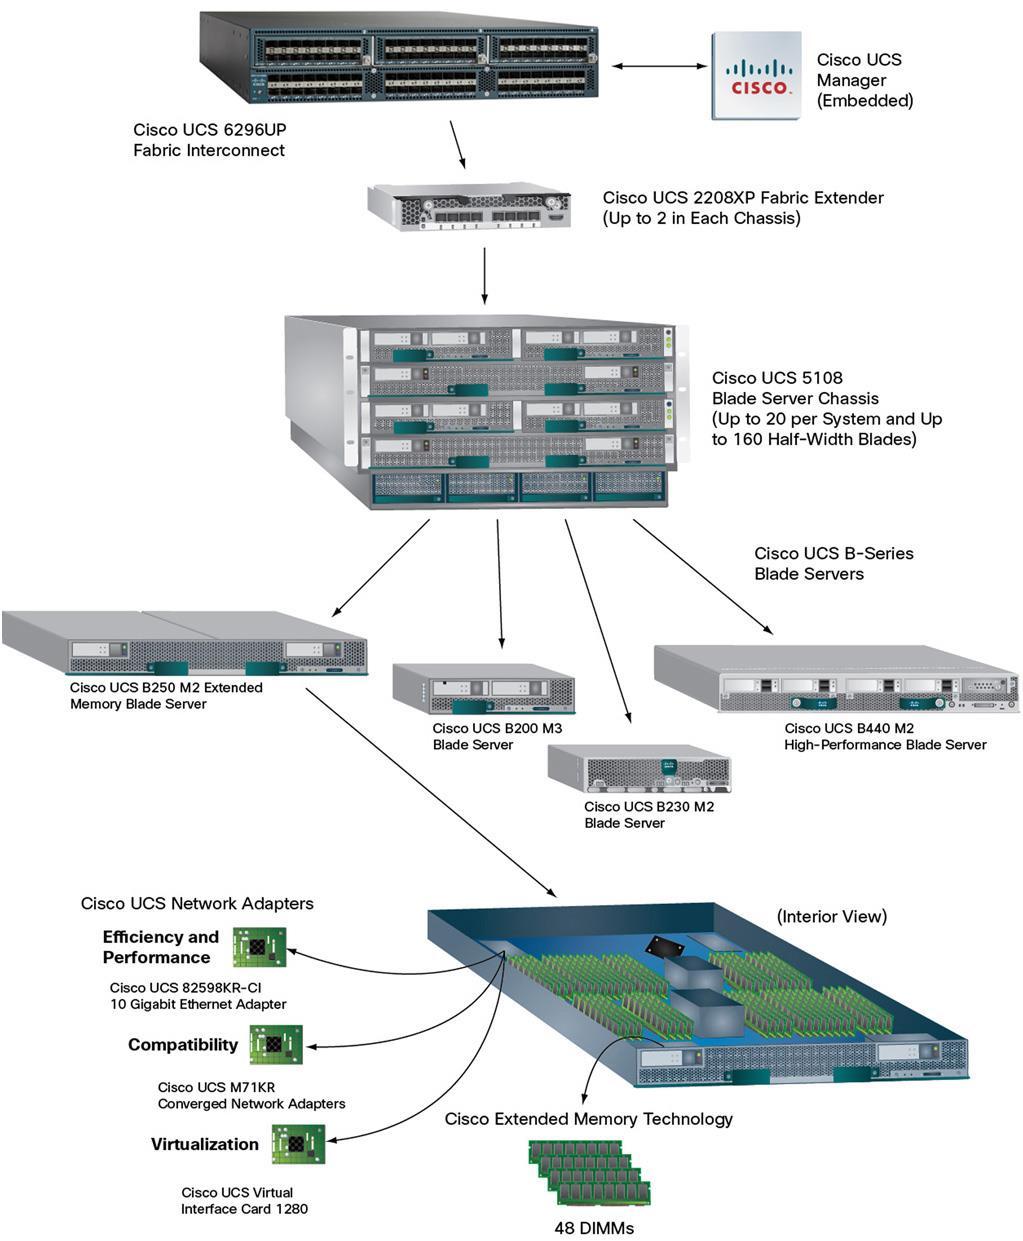 Data Sheet Cisco UCS 6200 Series Fabric Interconnects Cisco Unified Computing System Overview The Cisco Unified Computing System (Cisco UCS ) is a next-generation data center platform that unites